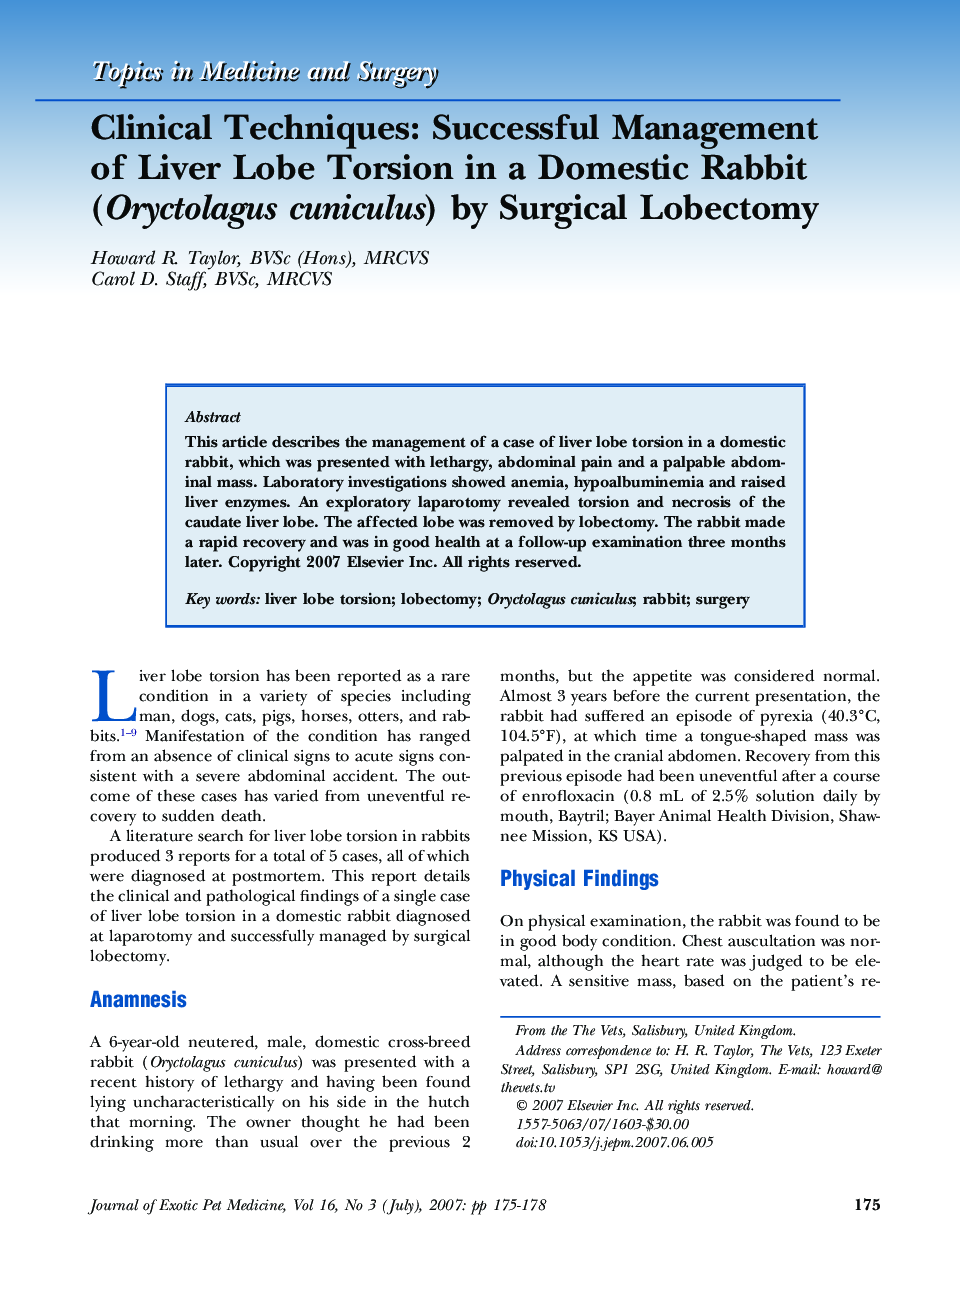 Clinical Techniques: Successful Management of Liver Lobe Torsion in a Domestic Rabbit (Oryctolagus cuniculus) by Surgical Lobectomy